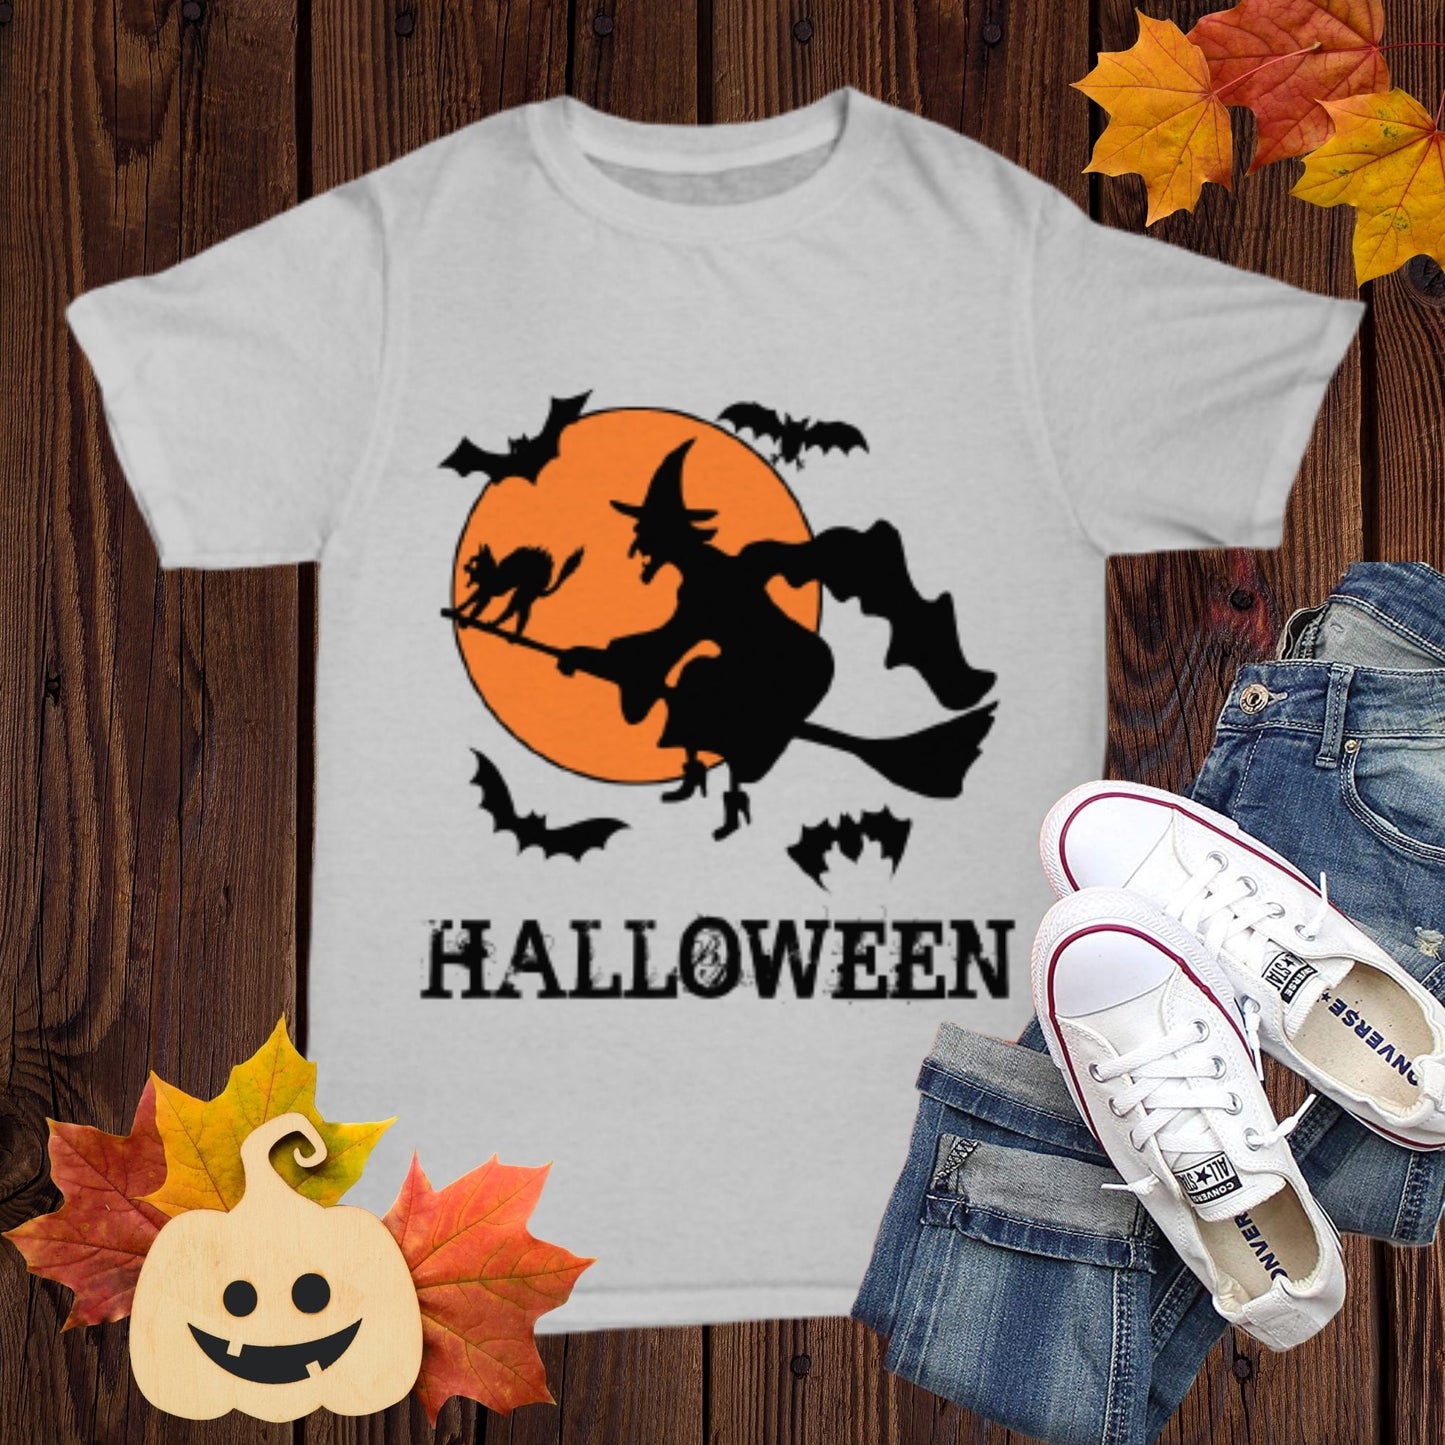 Halloween Novelty T-Shirt Flying Witch Halloween Gifts For Women Friends Unisex